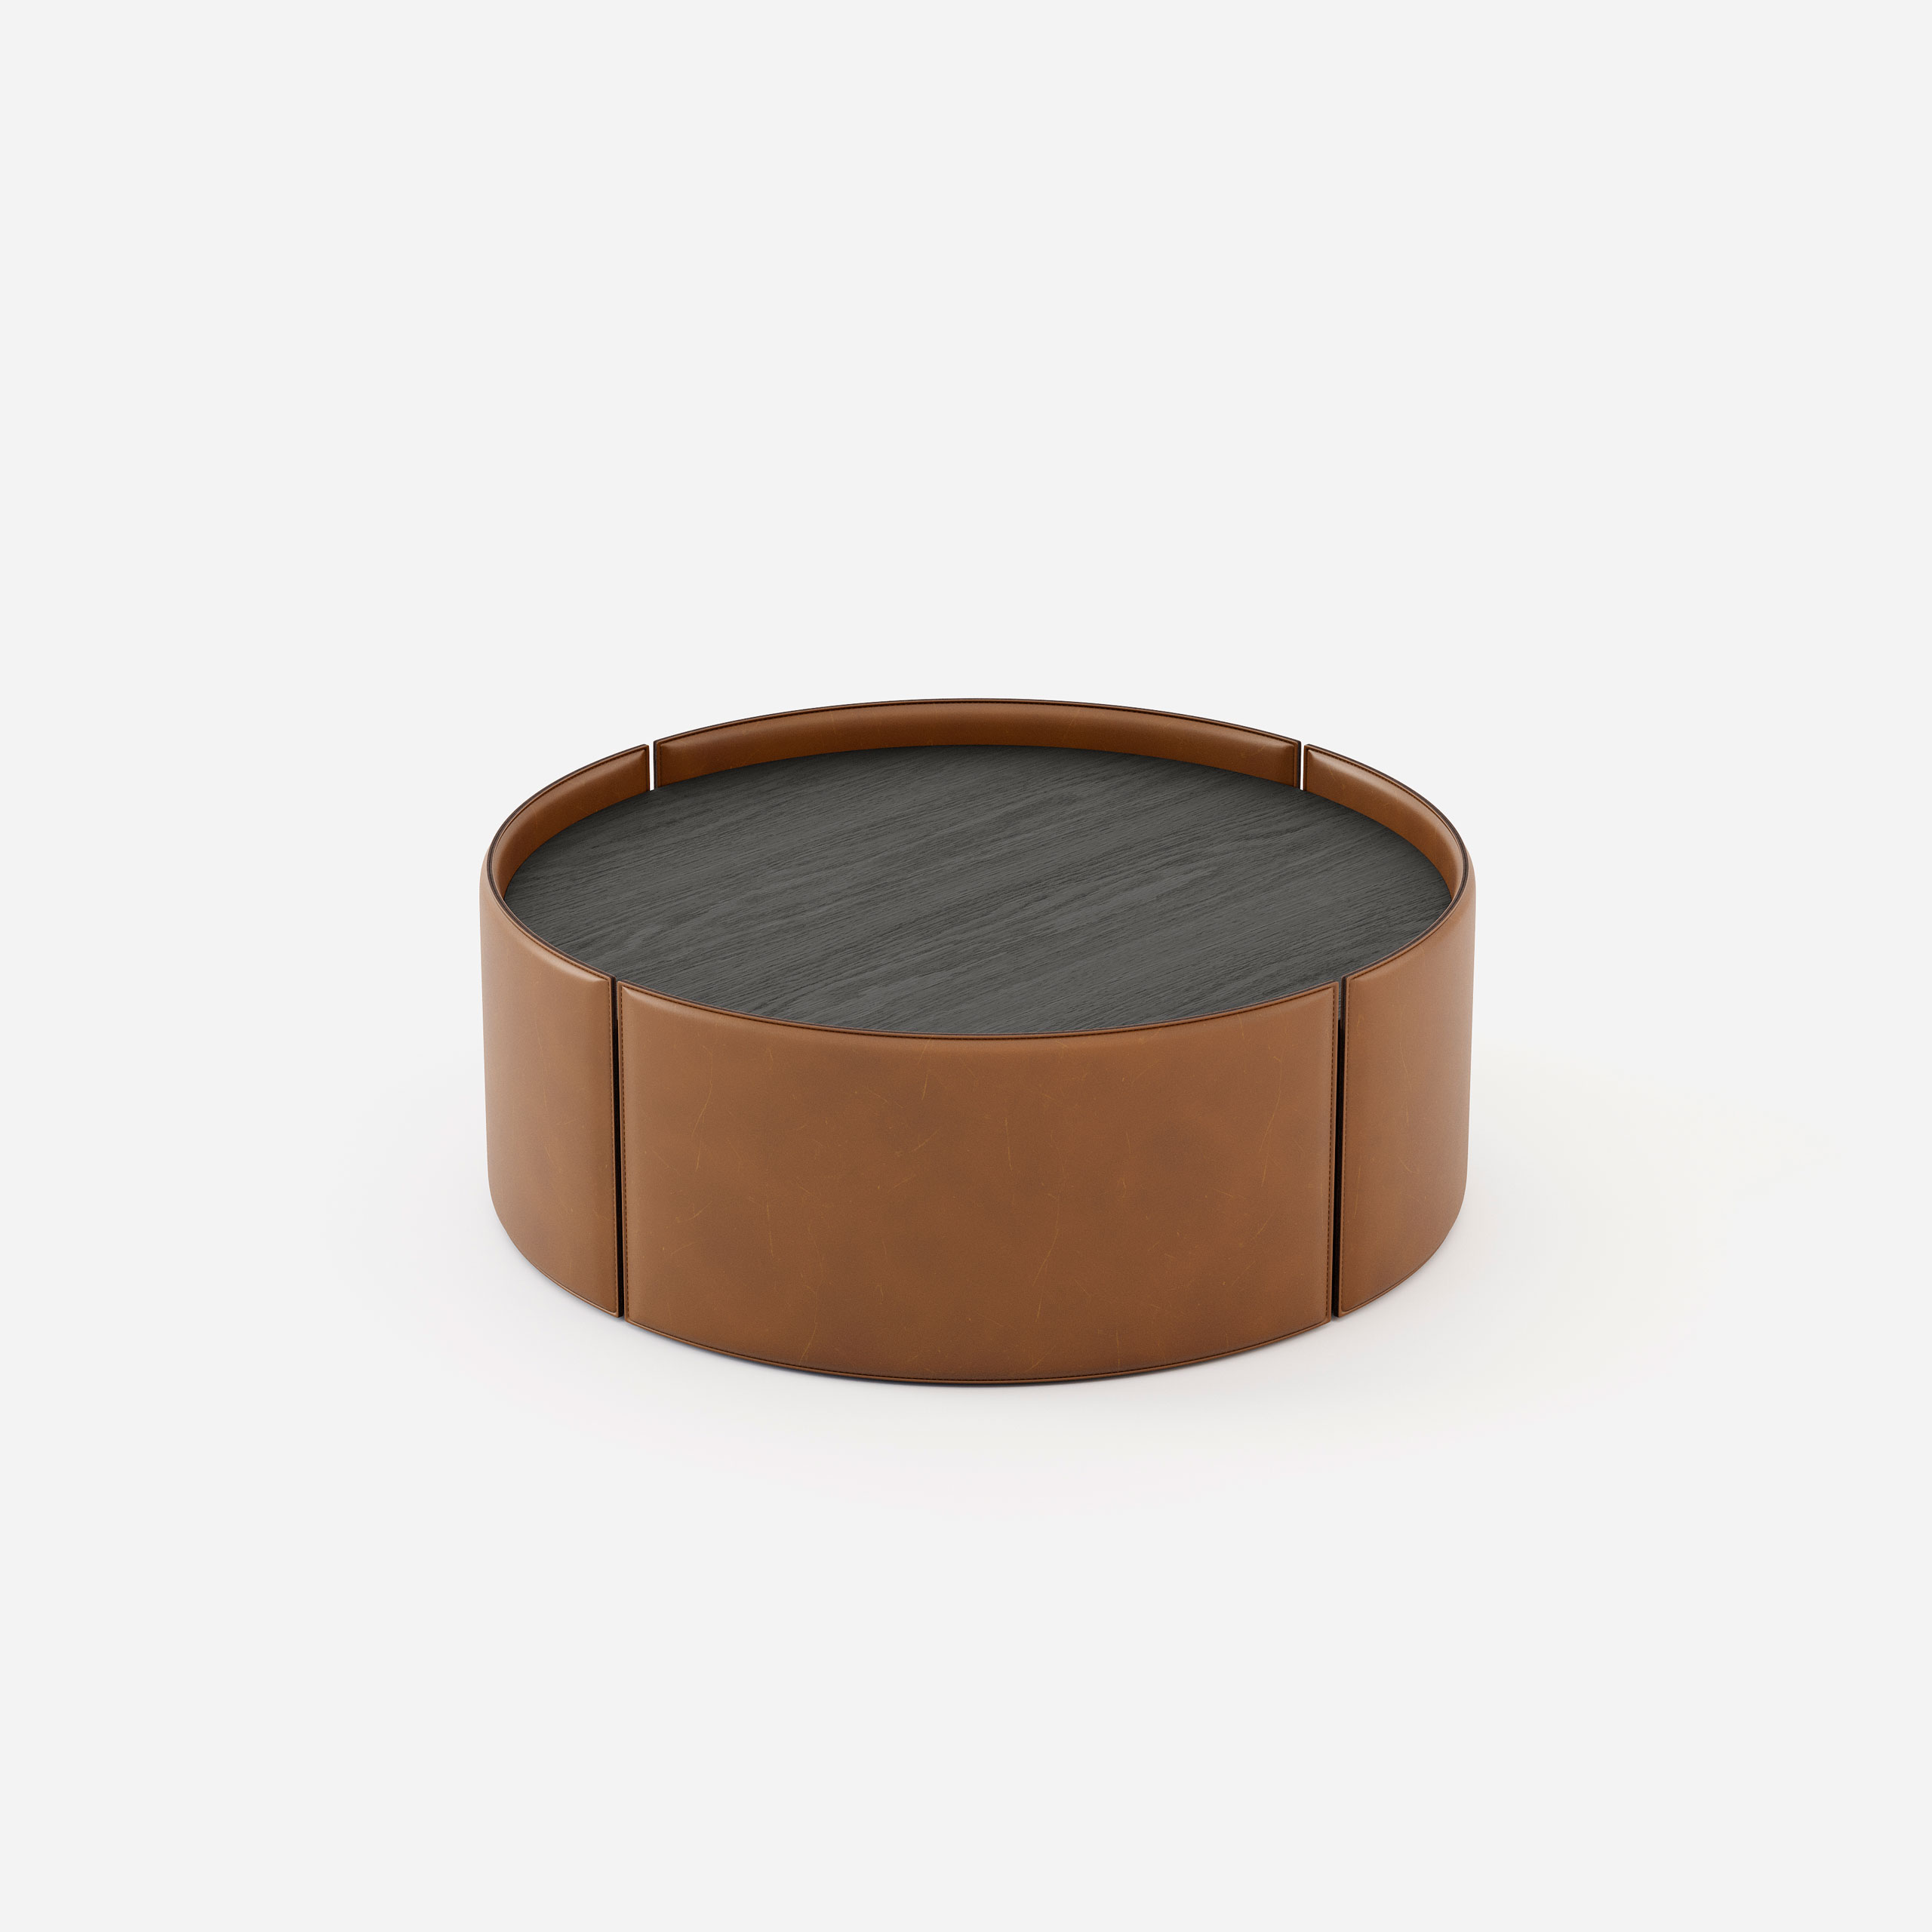 mano-coffee-table-natural-leather-new-collection-domkapa-2